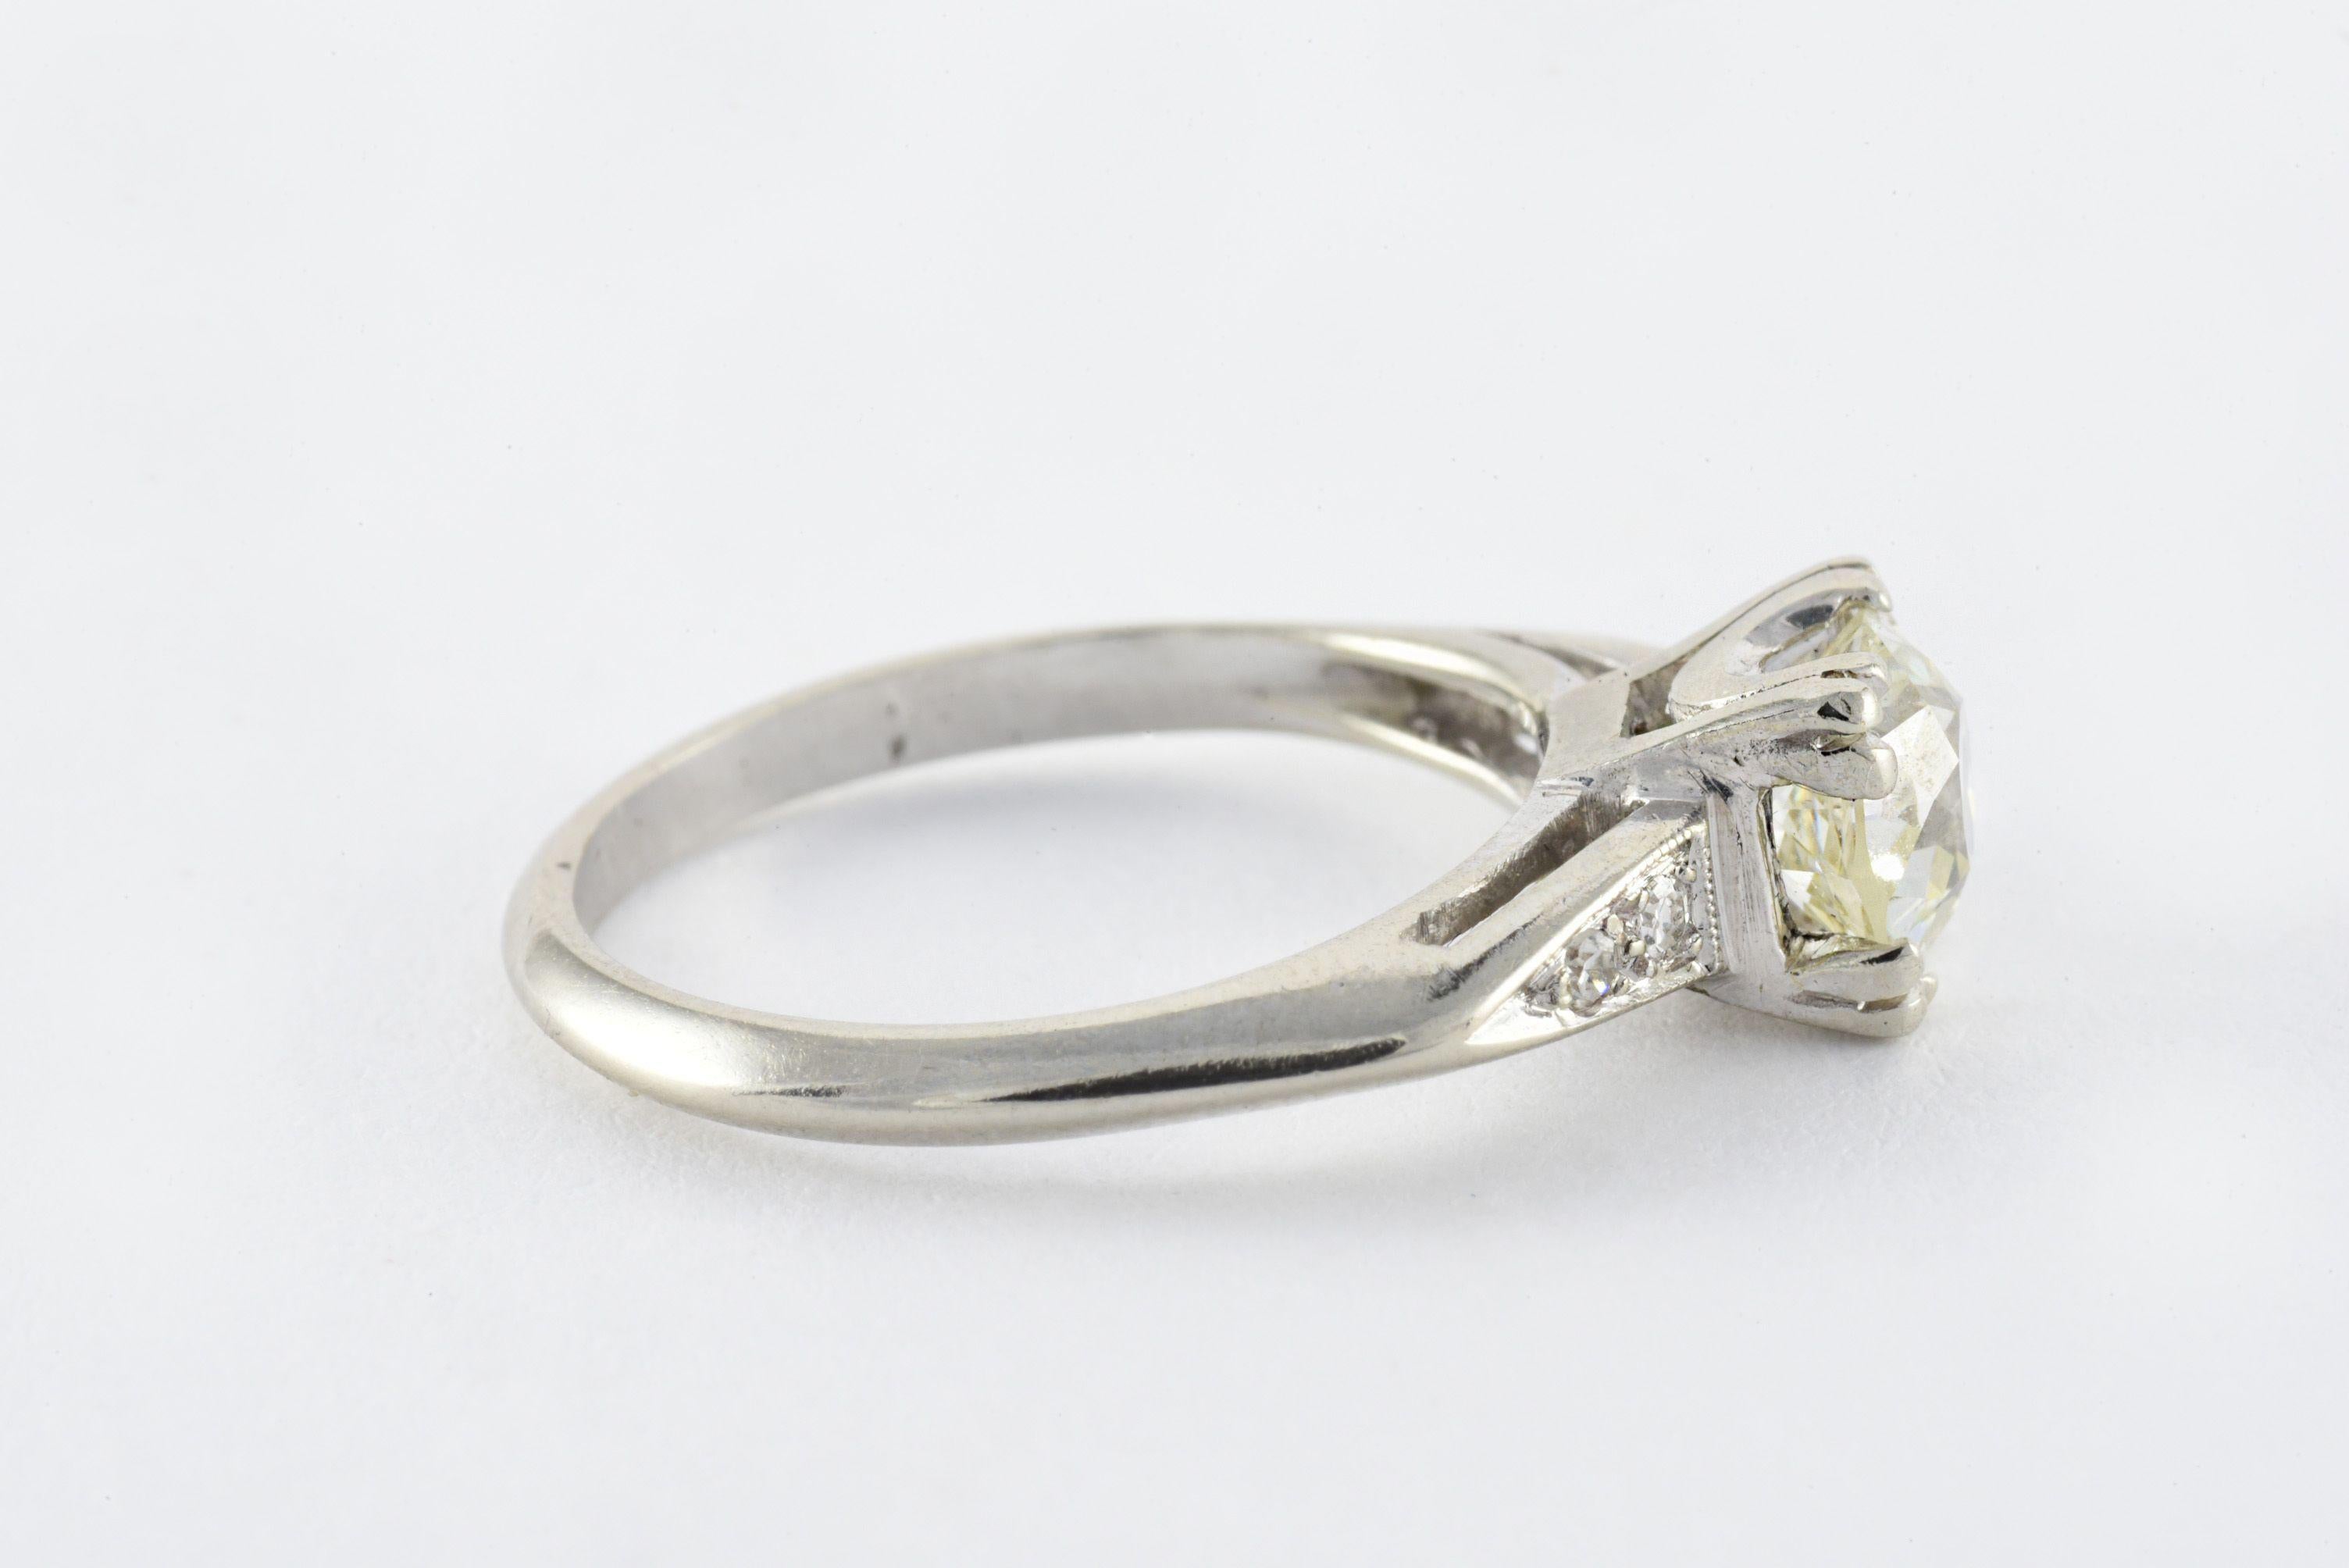 GIA Certified 1.08 Carat Diamond Engagement Ring In Good Condition For Sale In Denver, CO